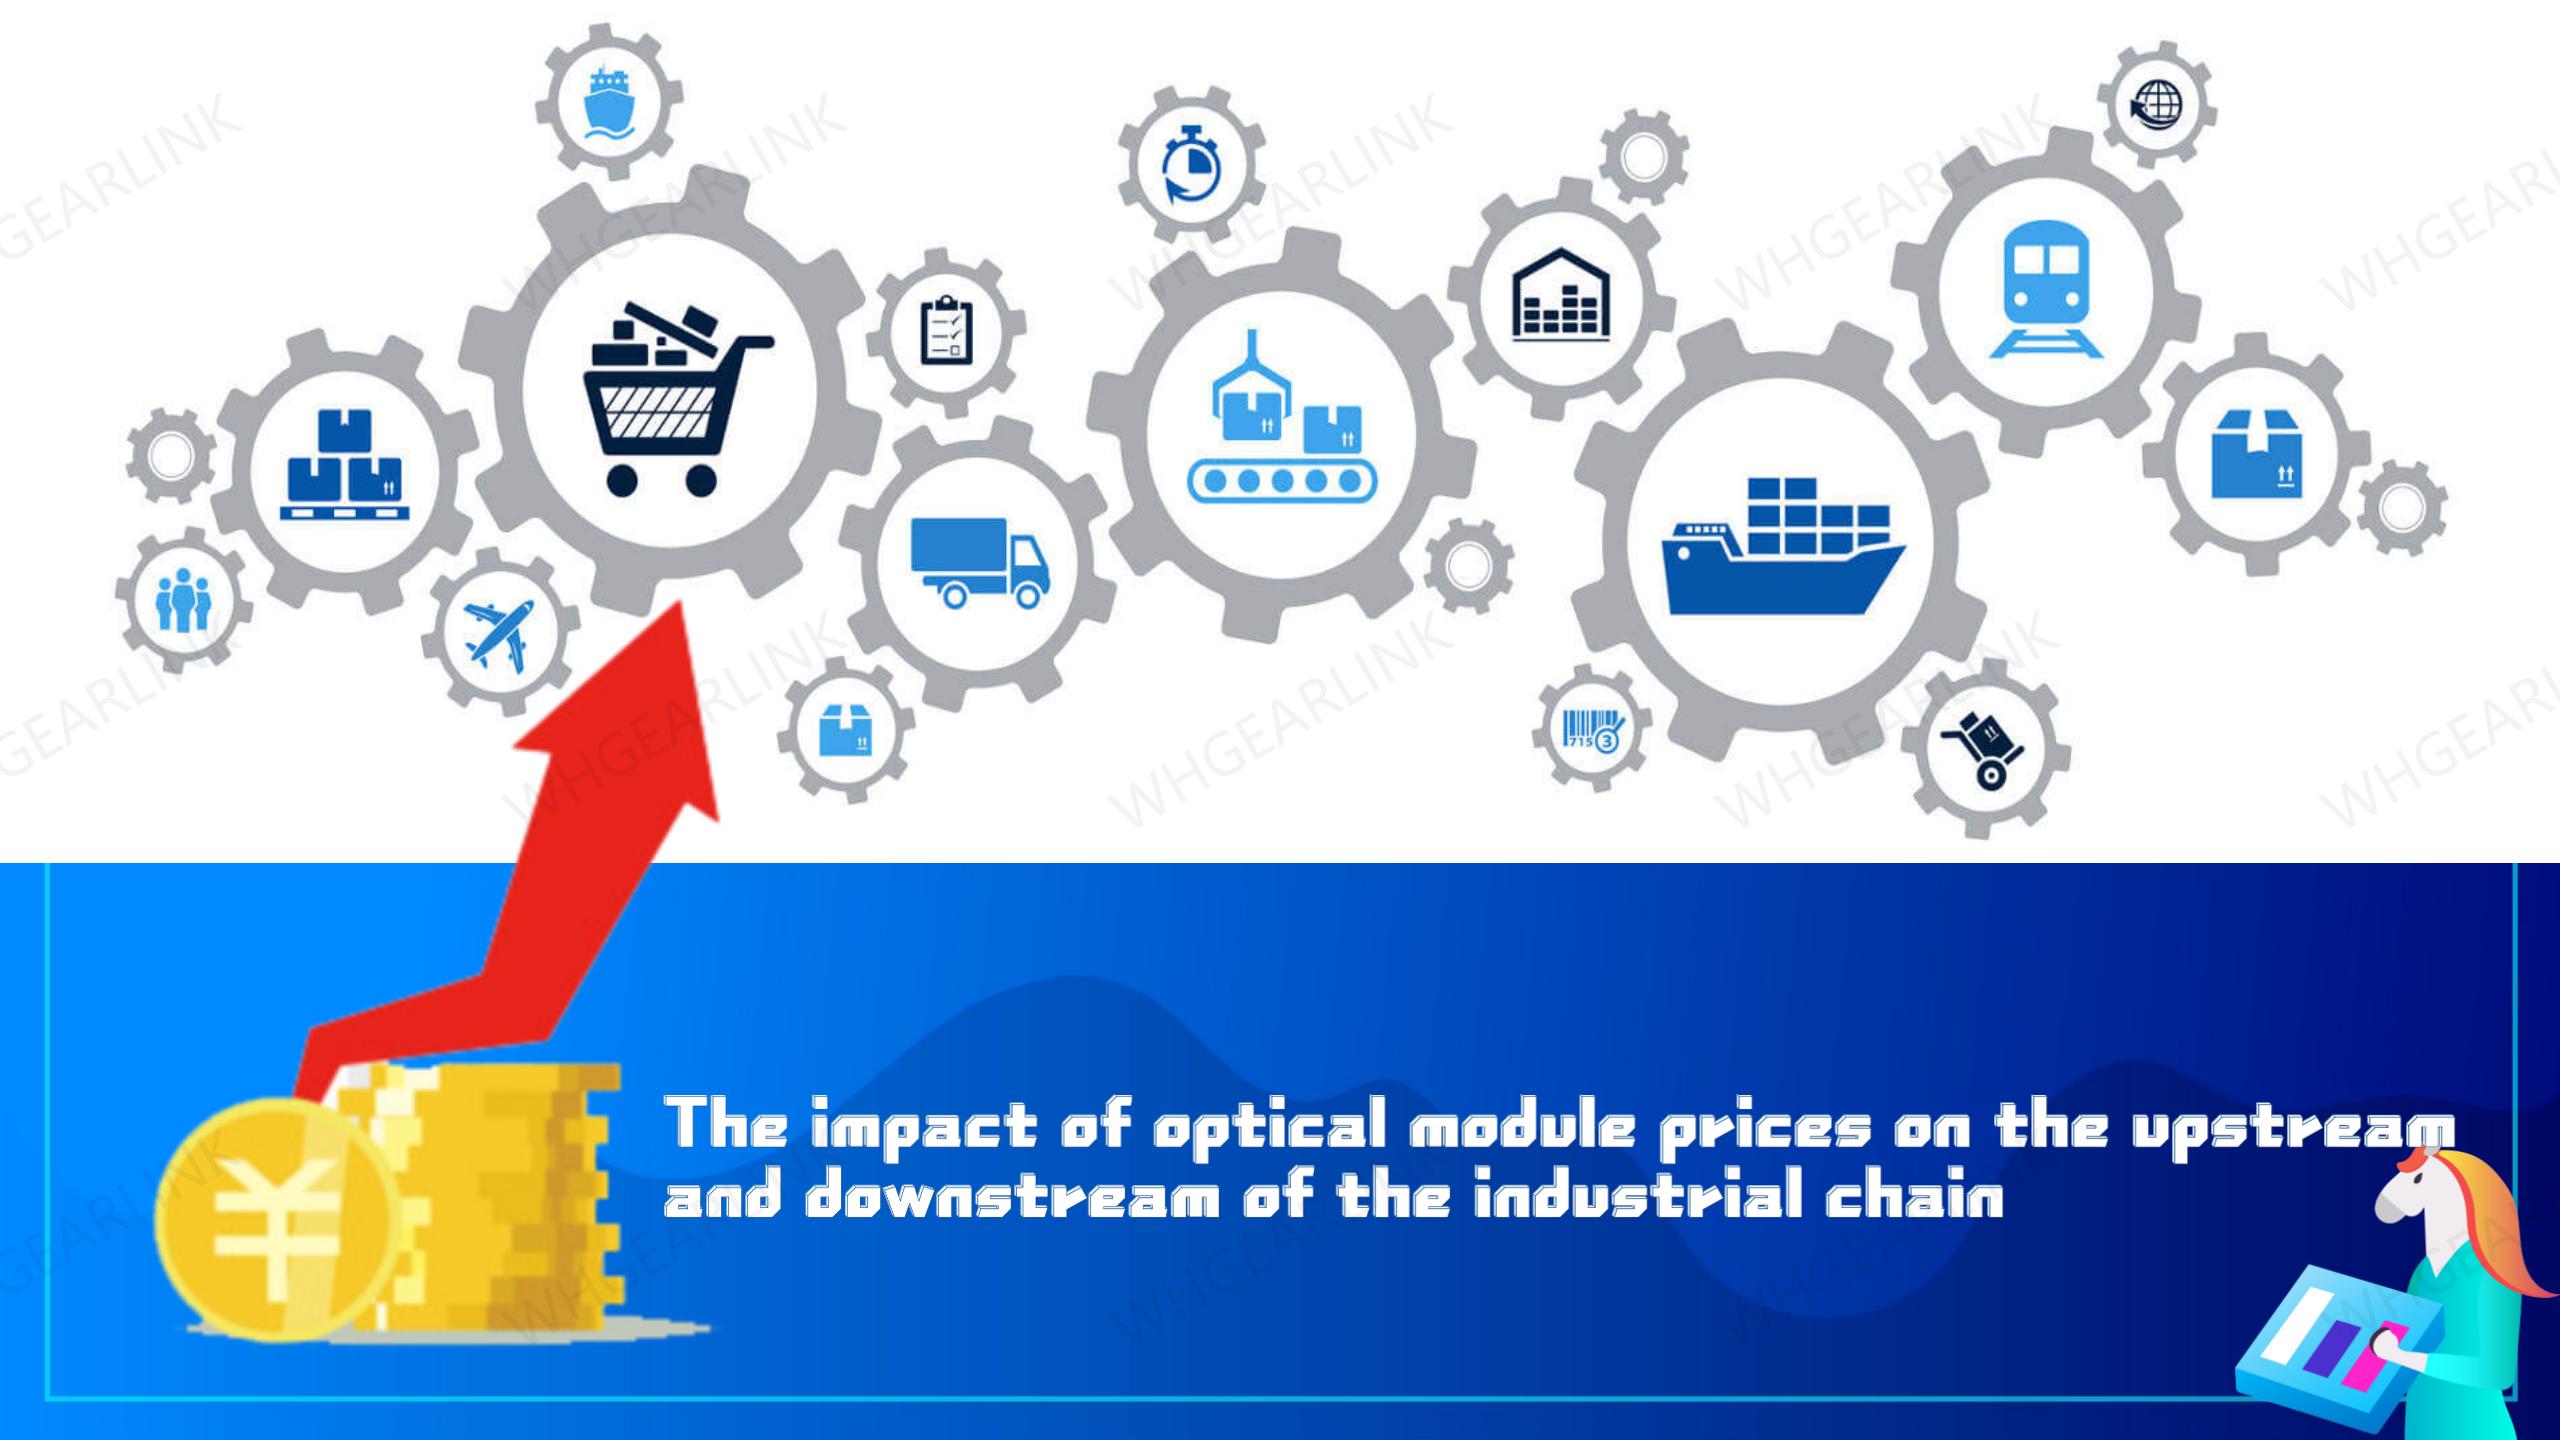 The impact of optical module prices on the upstream and downstream of the industrial chain